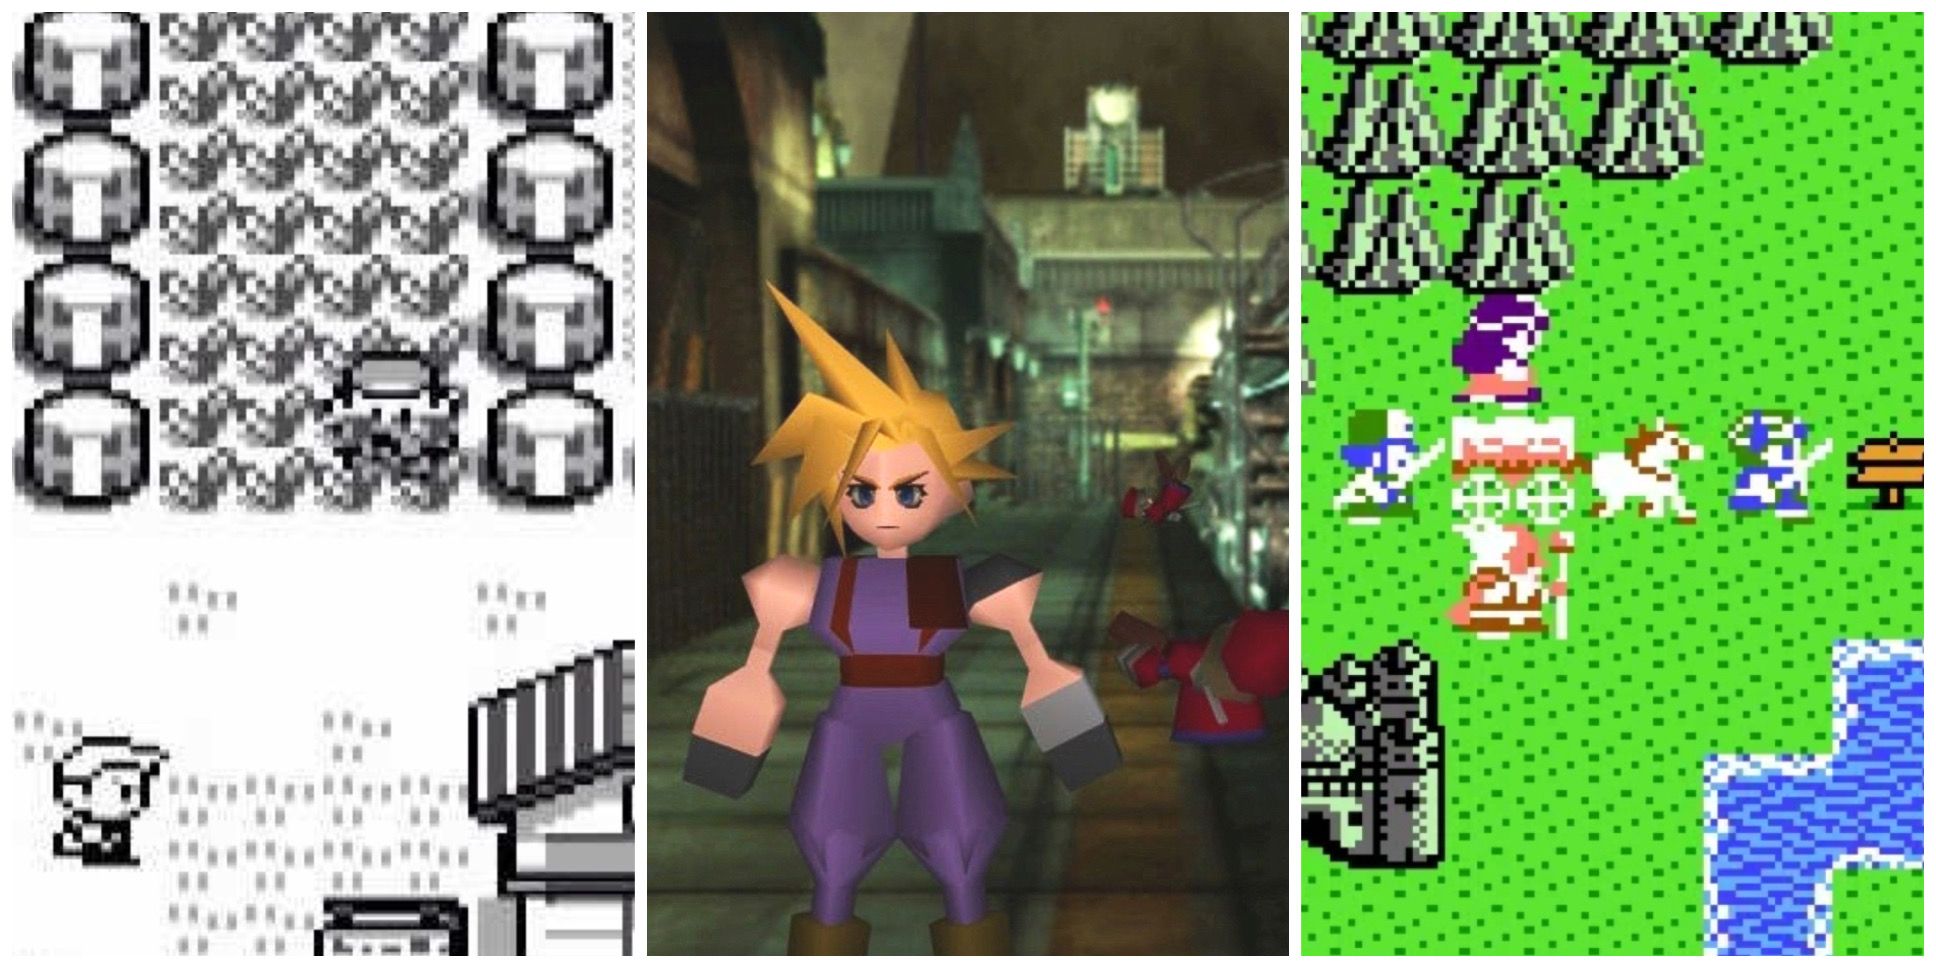 Pokemon red and blue, final fantasy vii and dragon quest 1 screenshots